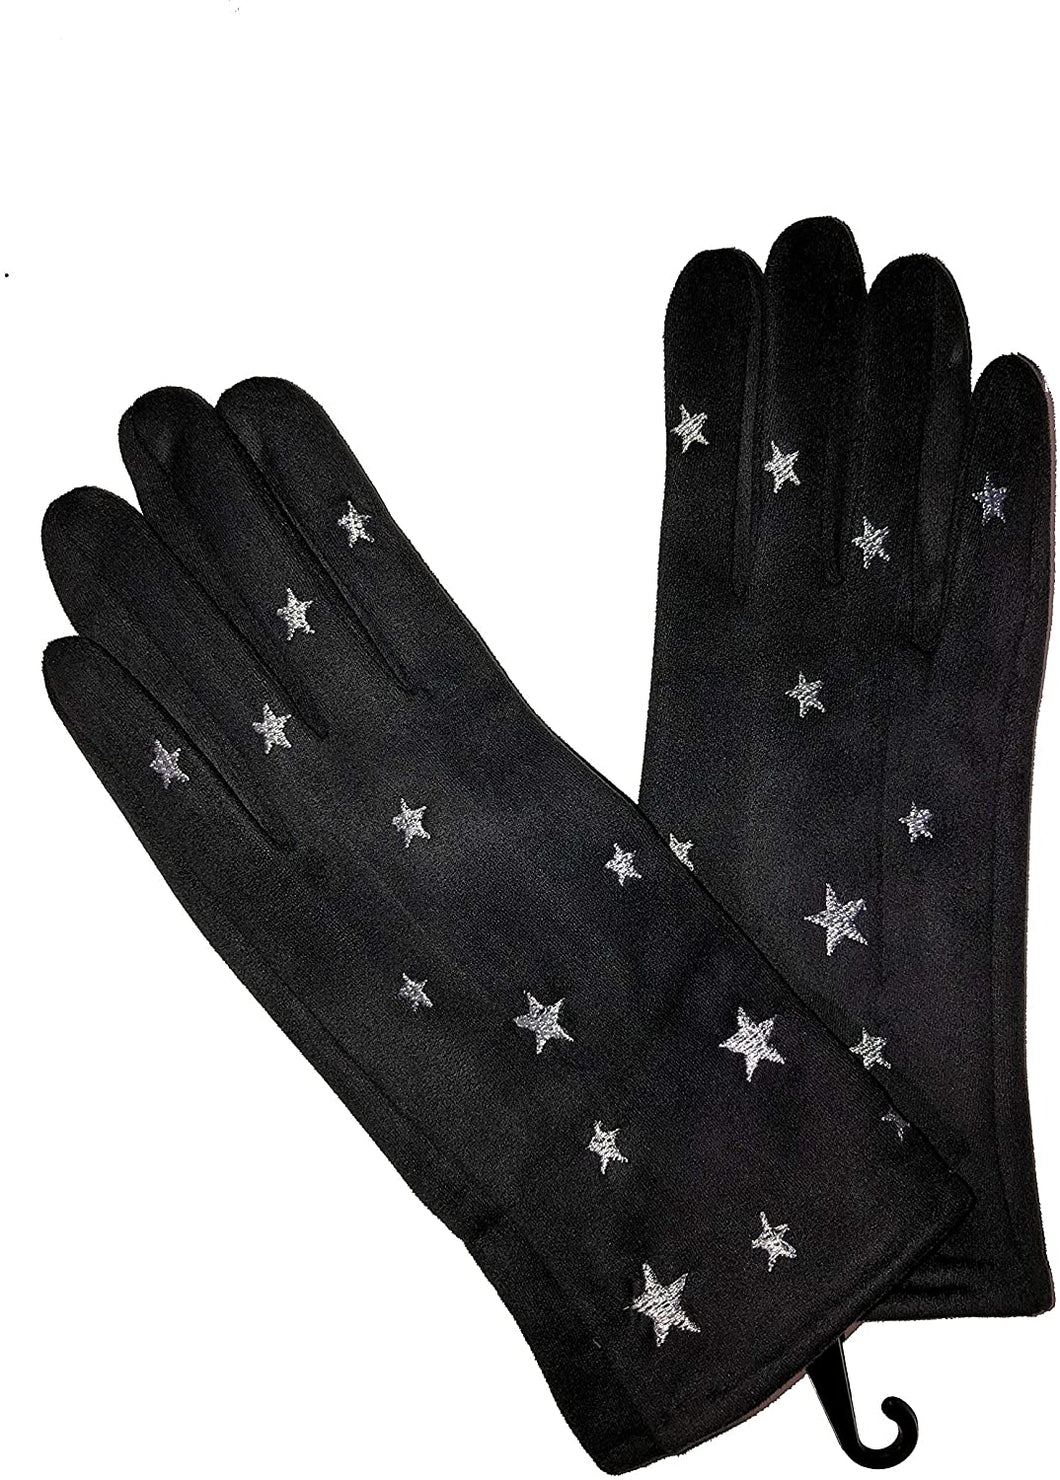 G1908 Very stylish Ladies gloves with white embroidered stars, great present/gift.